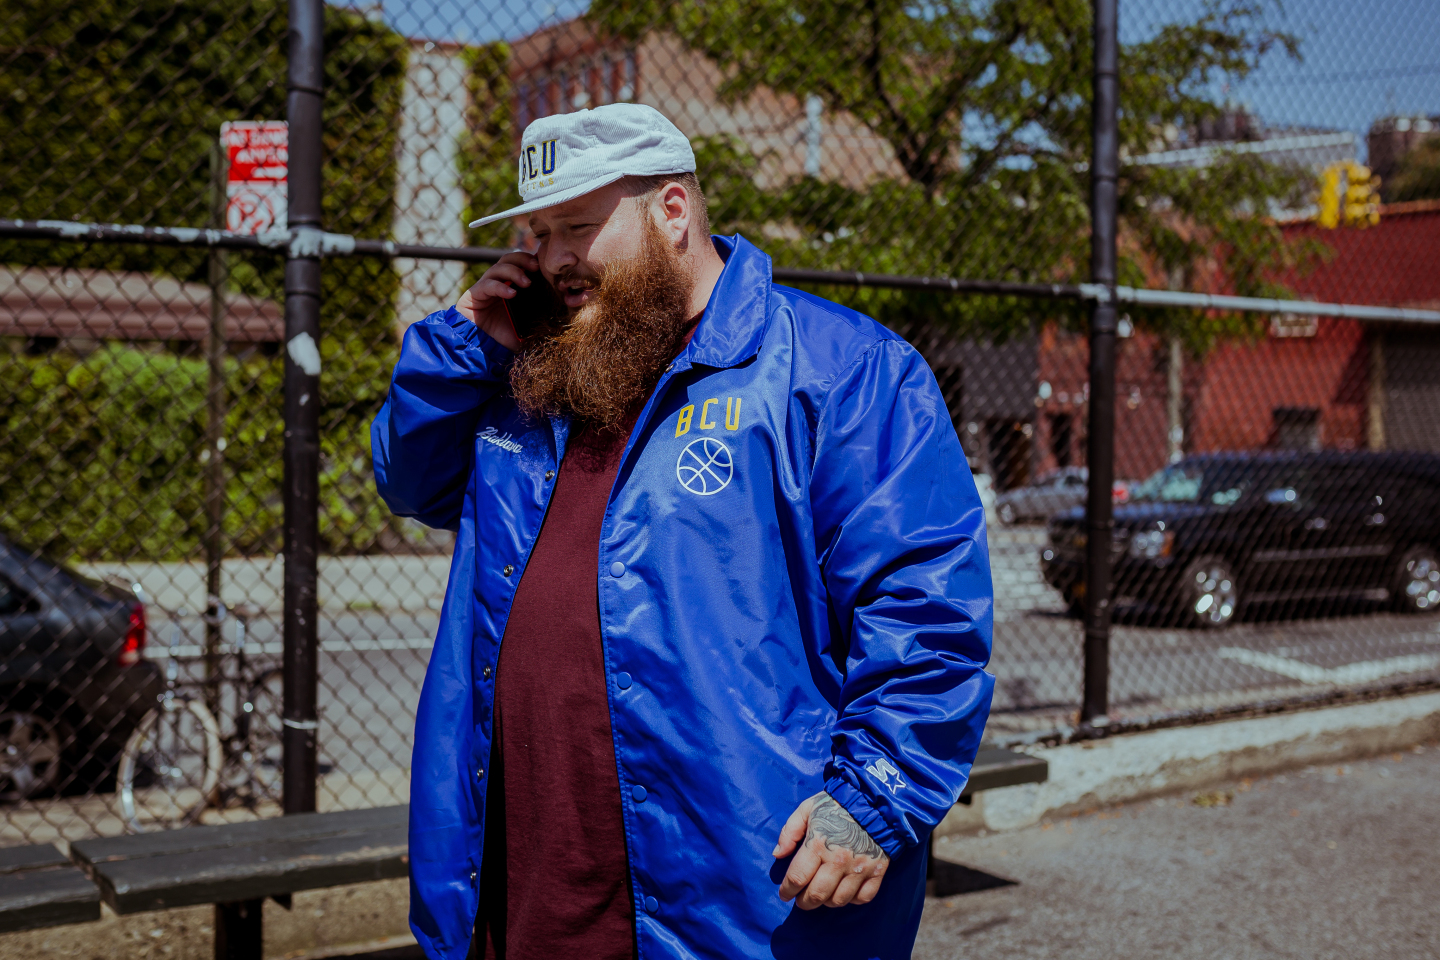 Action Bronson Packer Shoes Starter BCU collection 12